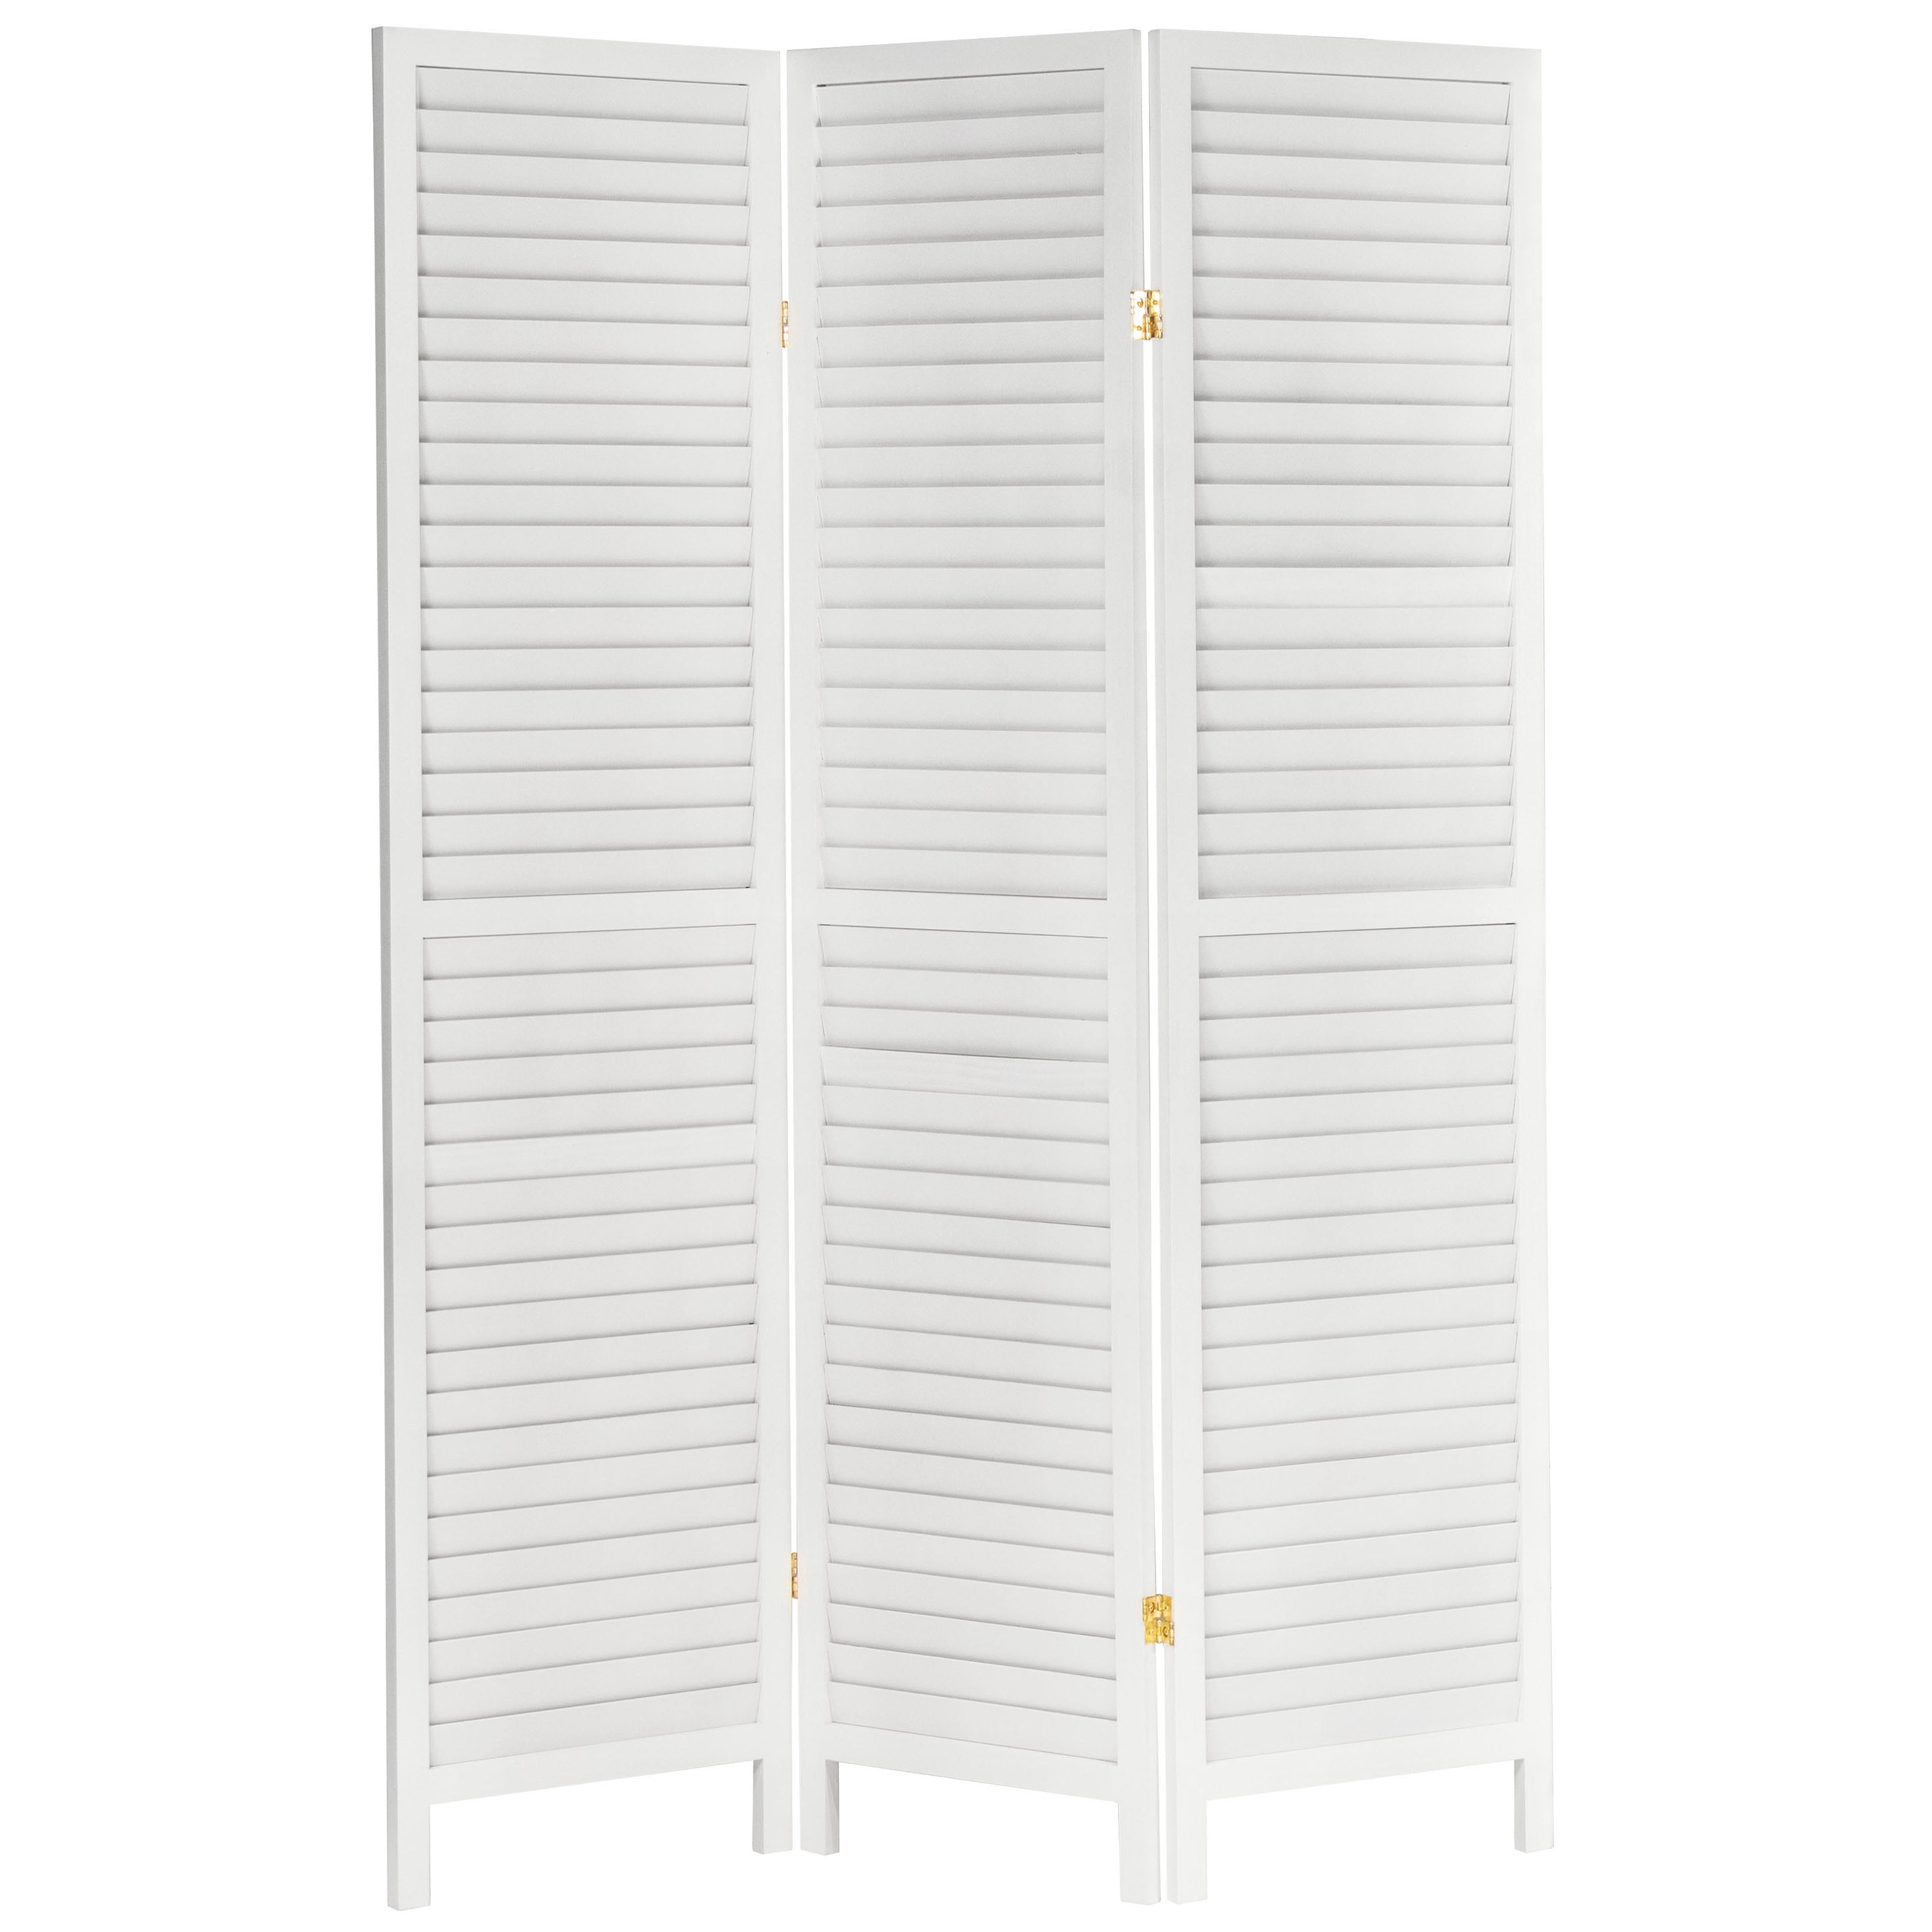 Oriental Furniture 6 Ft Tall Wooden Louvered Room Divider White 3